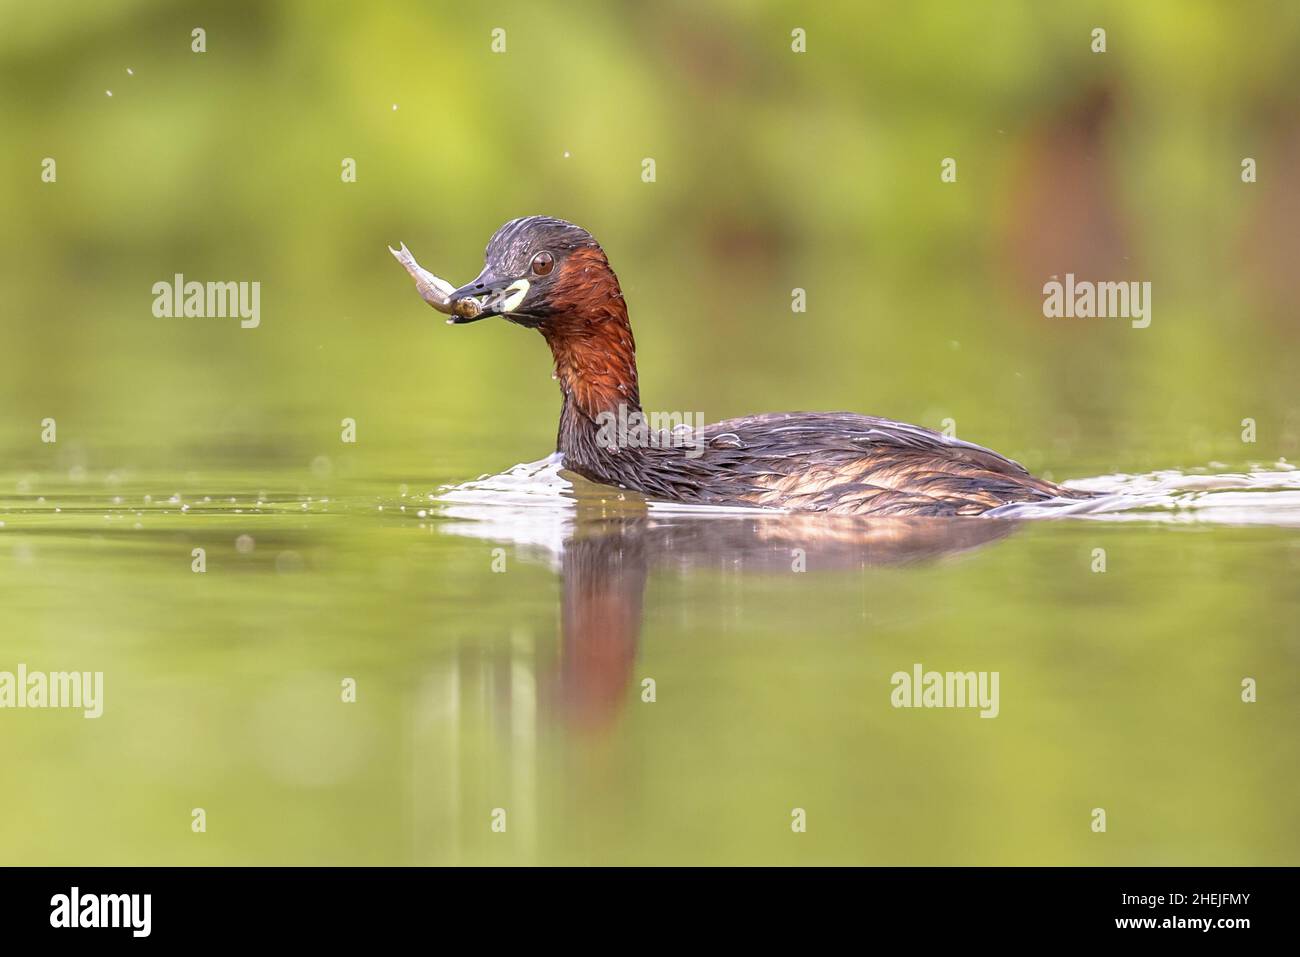 Little Grebe (Tachybaptus ruficollis) Swimming in Water catching fish. This Waterfowl bird is member of the Grebe family. Wildlife Scene of Nature in Stock Photo